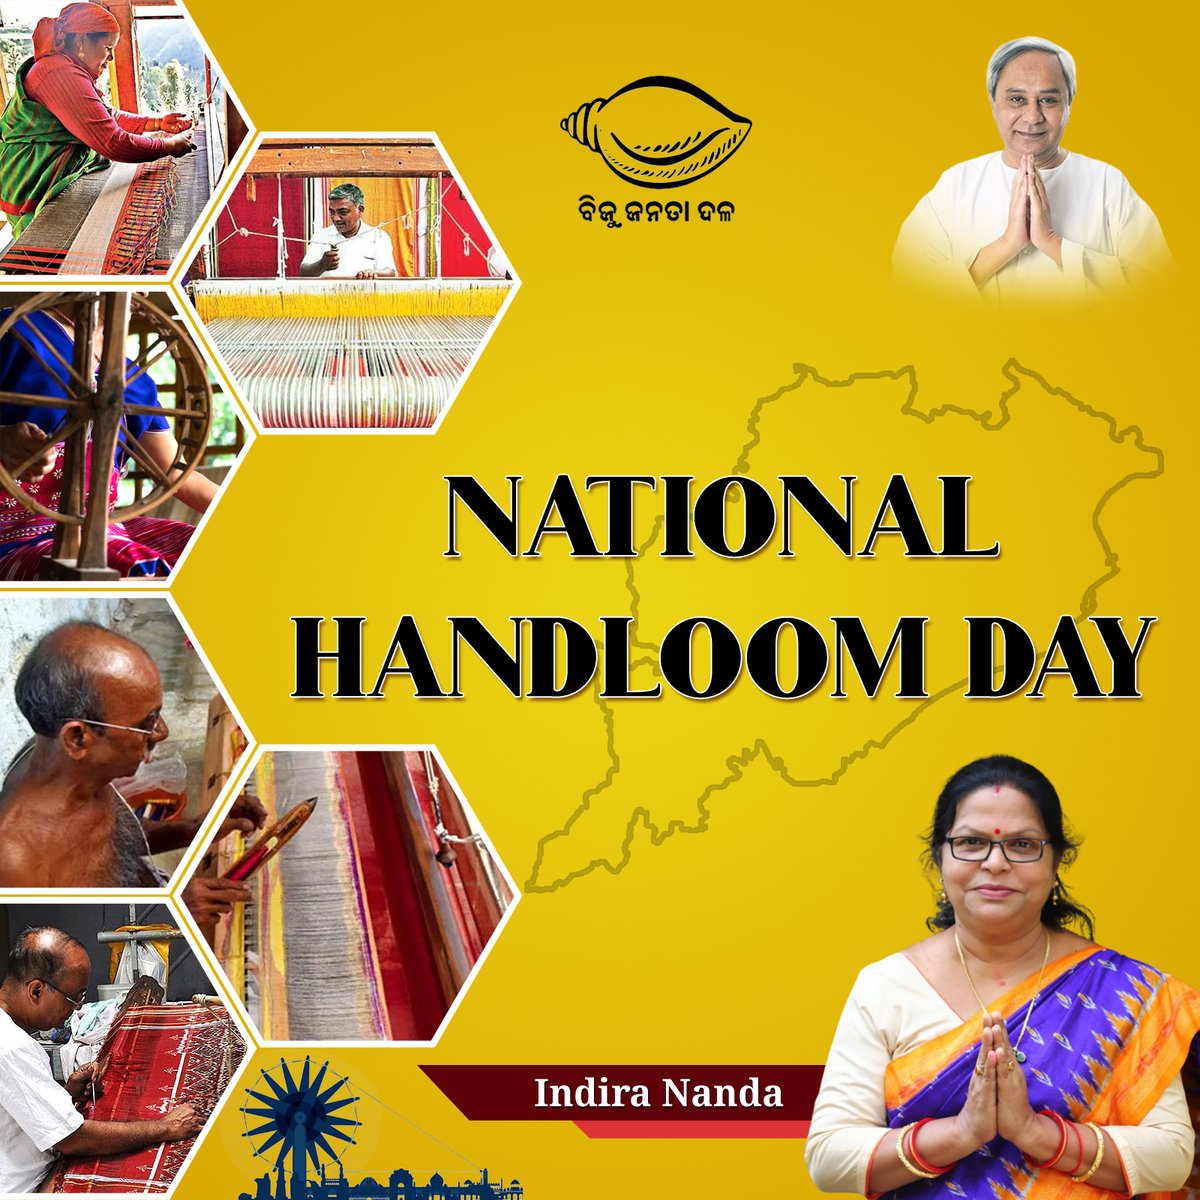 Let's appreciate the timeless beauty and sustainable craftsmanship of handwoven textiles. Let's come together to support our weavers and their remarkable artistry.  Happy National Handloom Day.

#HandloomHeritage #SupportIndianWeavers #Drindirananda #cmoodisha #bjddigitalwing